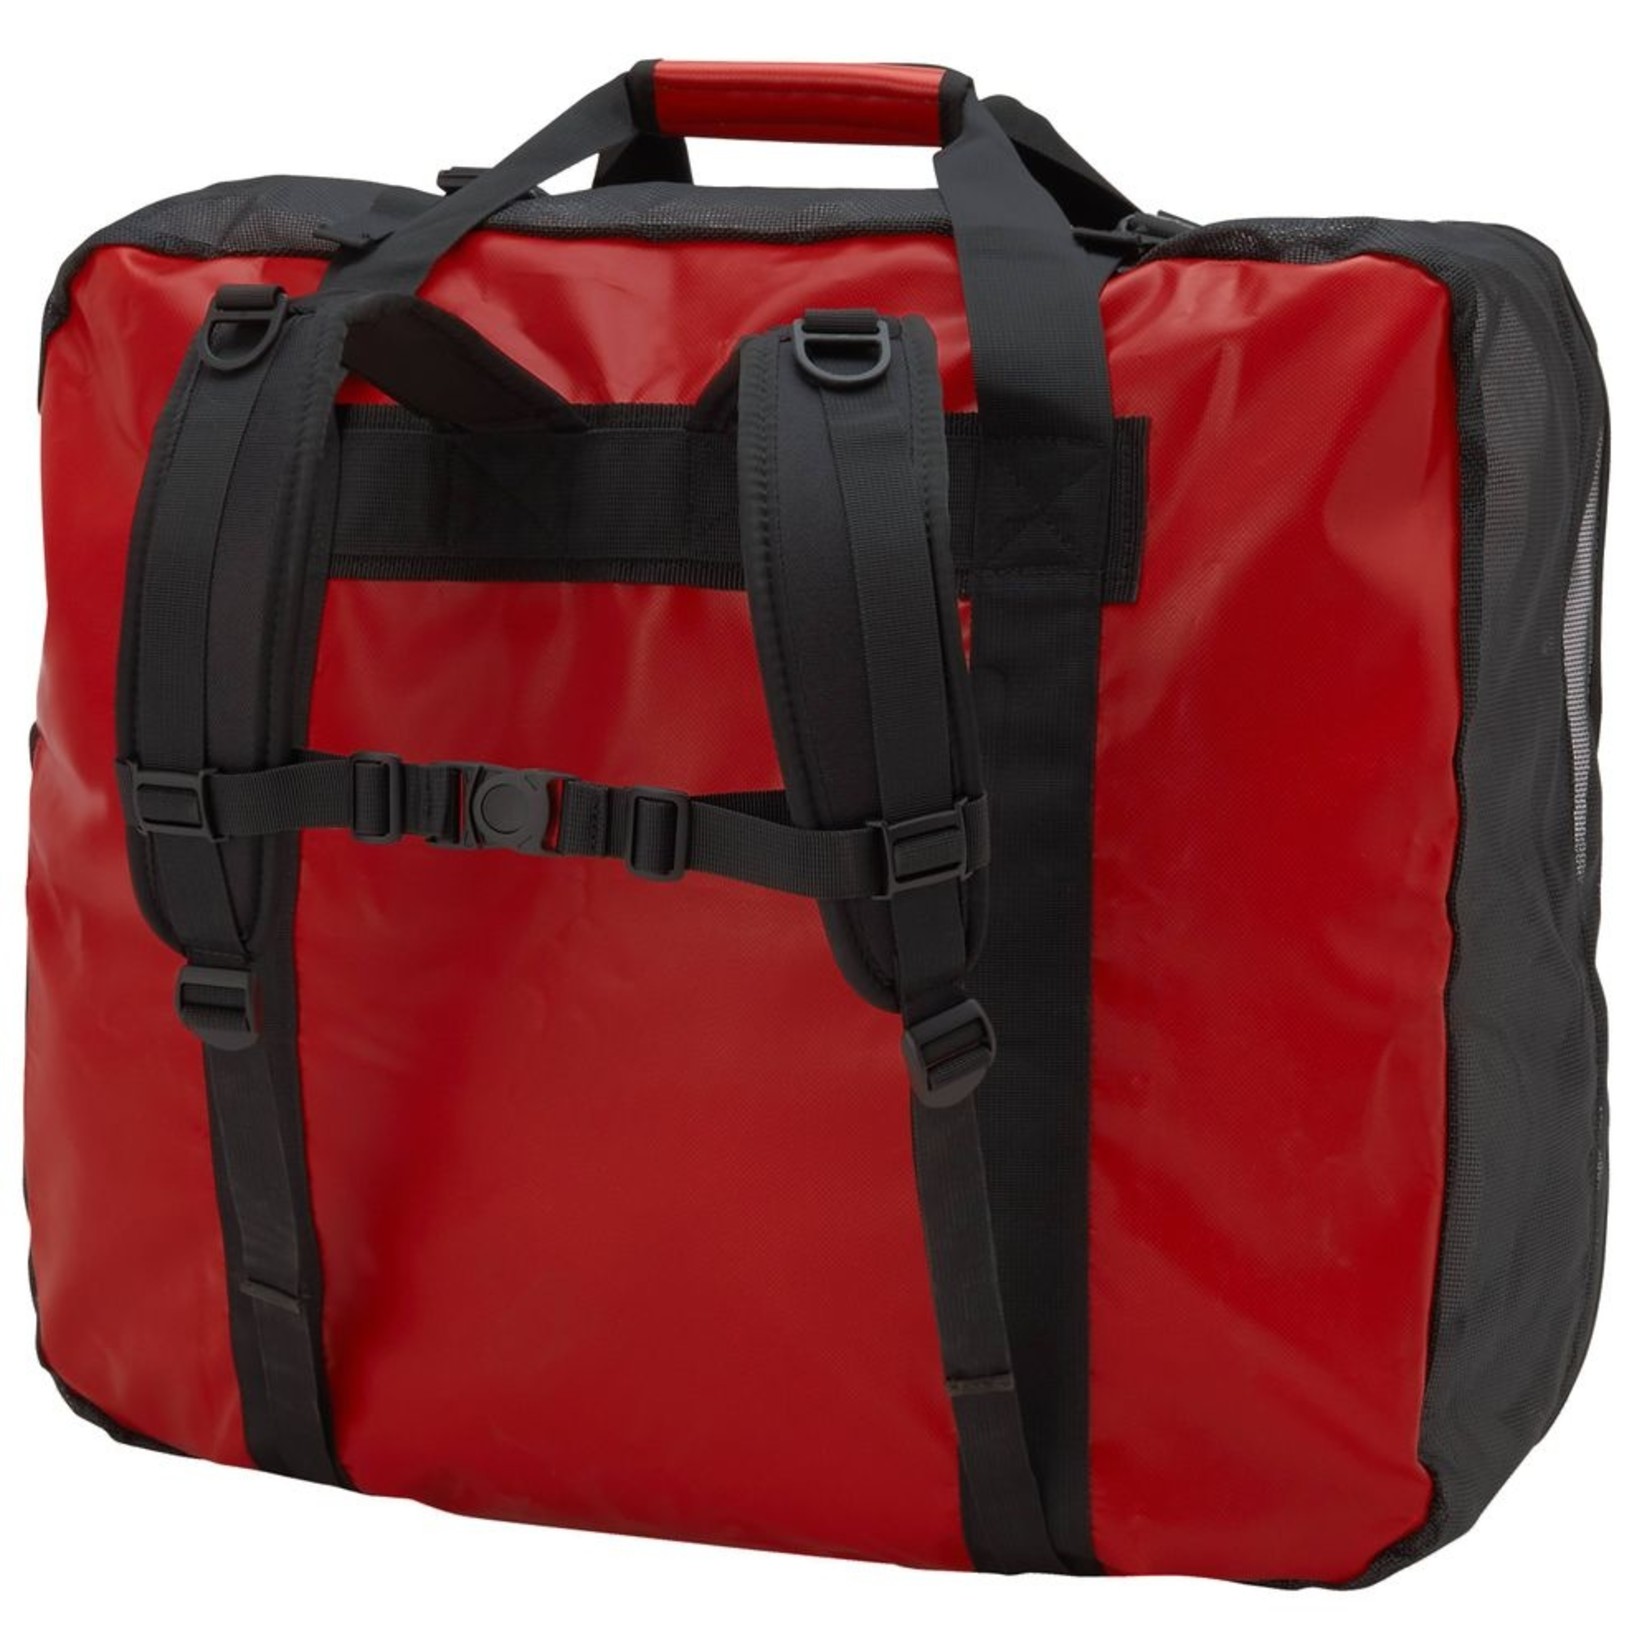 NRS NRS Boat Bag for Rafts,IKs and Cats